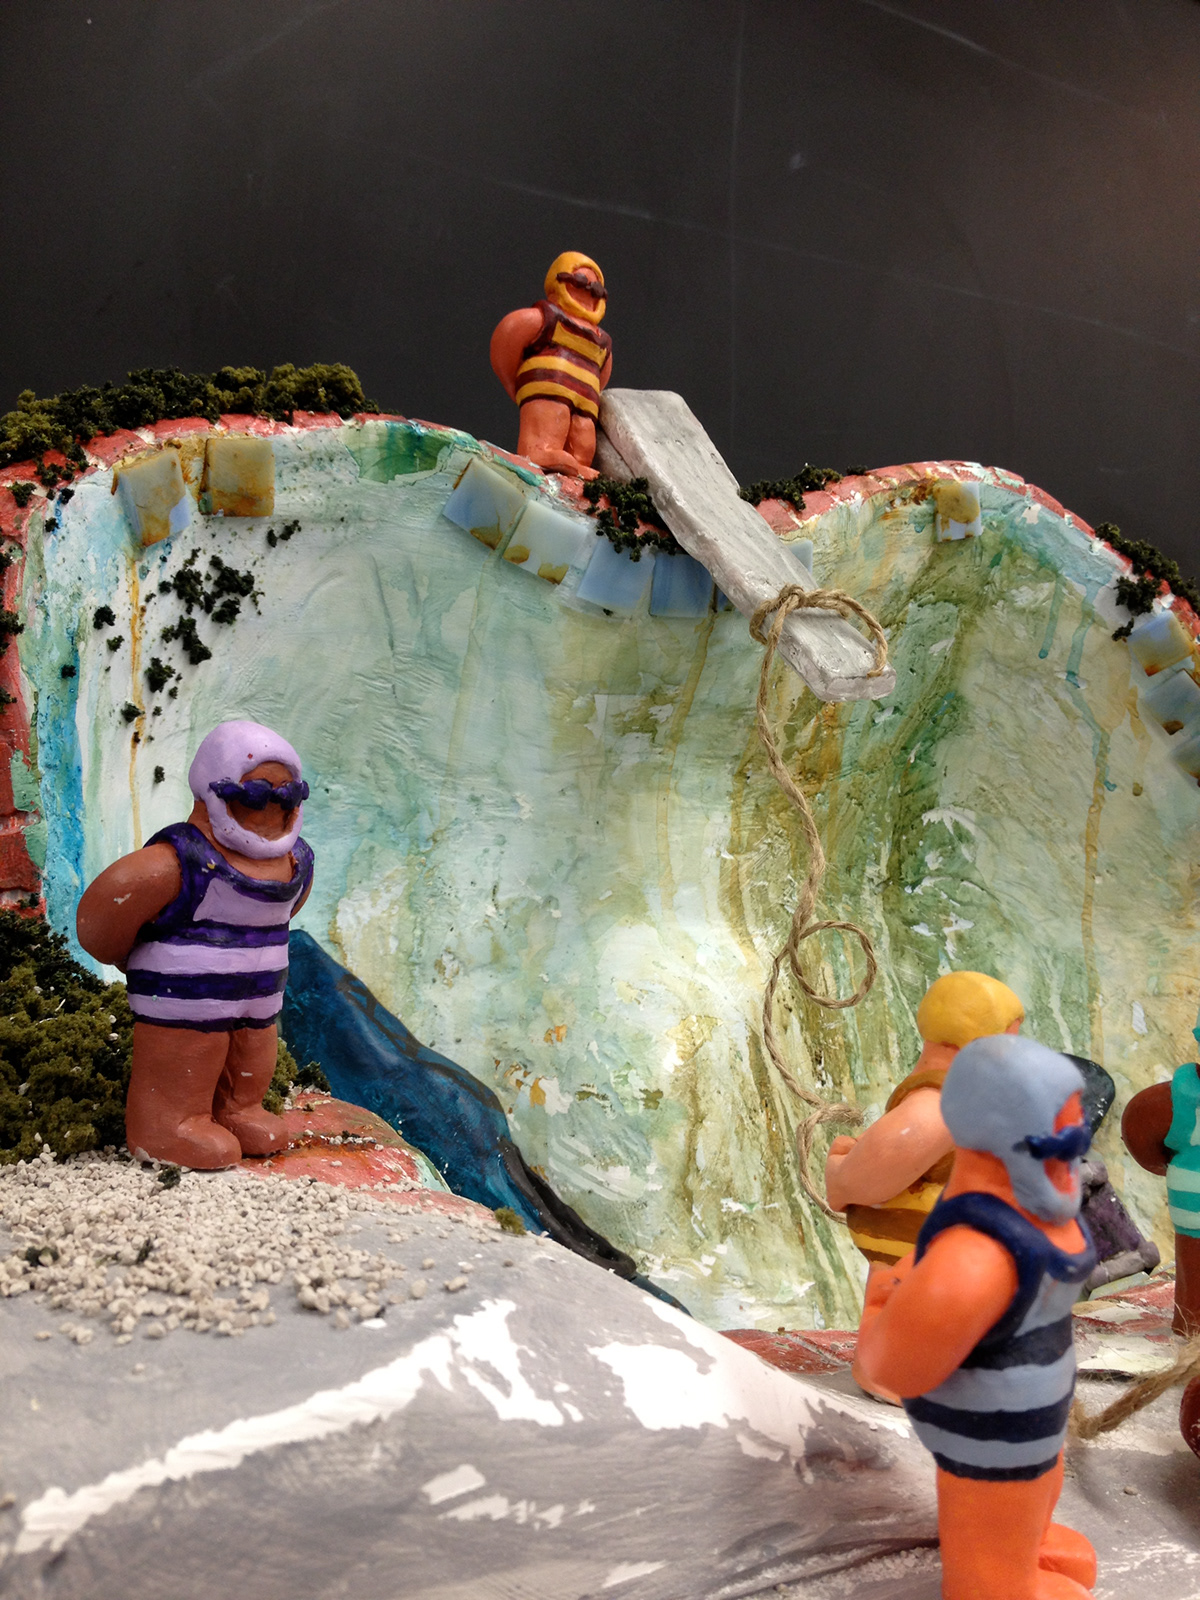 #thepoolproject #swimmingpools #diorama #littleswimmers #sculpture #3D #abandoned #painting